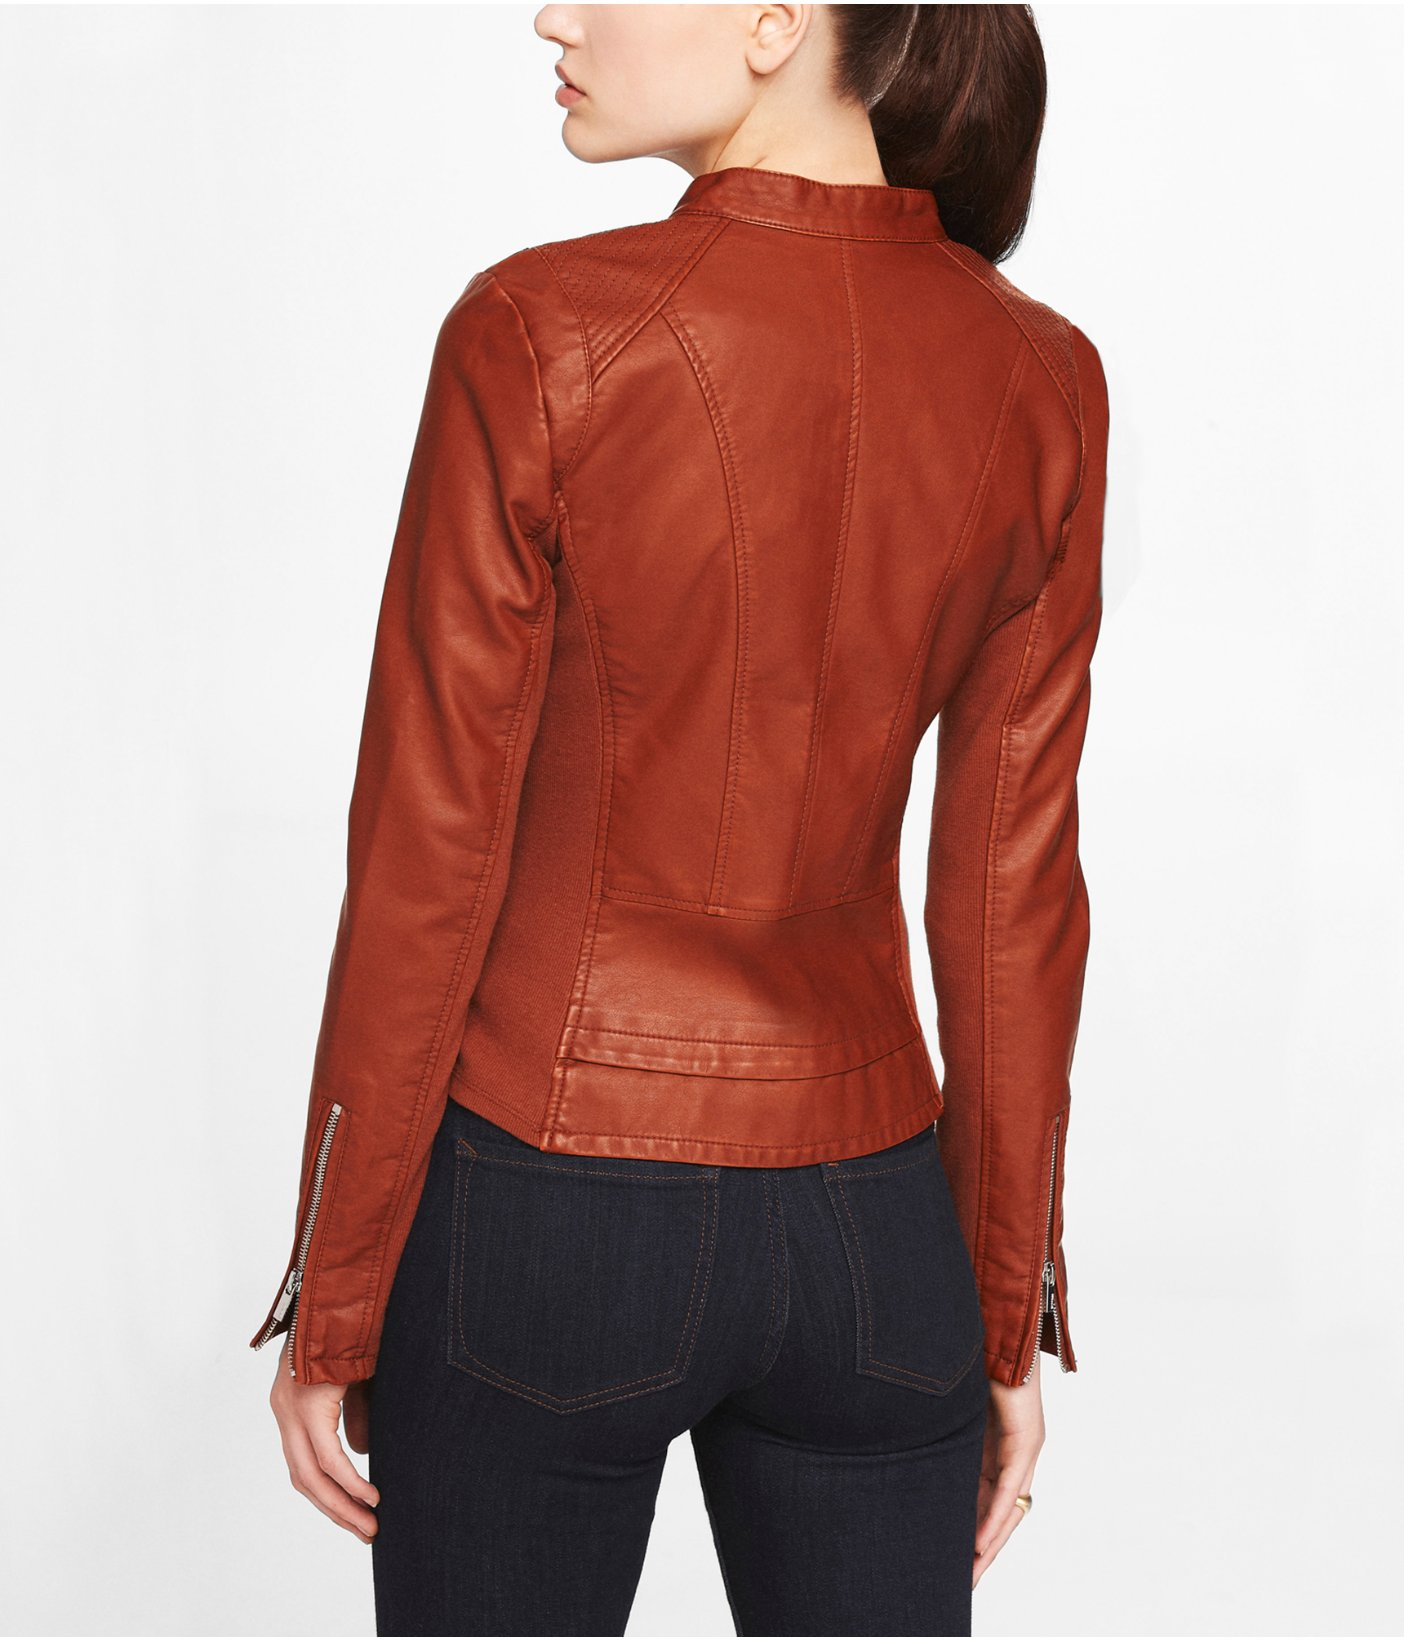 Lyst - Express Minus The Leather Double Peplum Moto Jacket in Brown